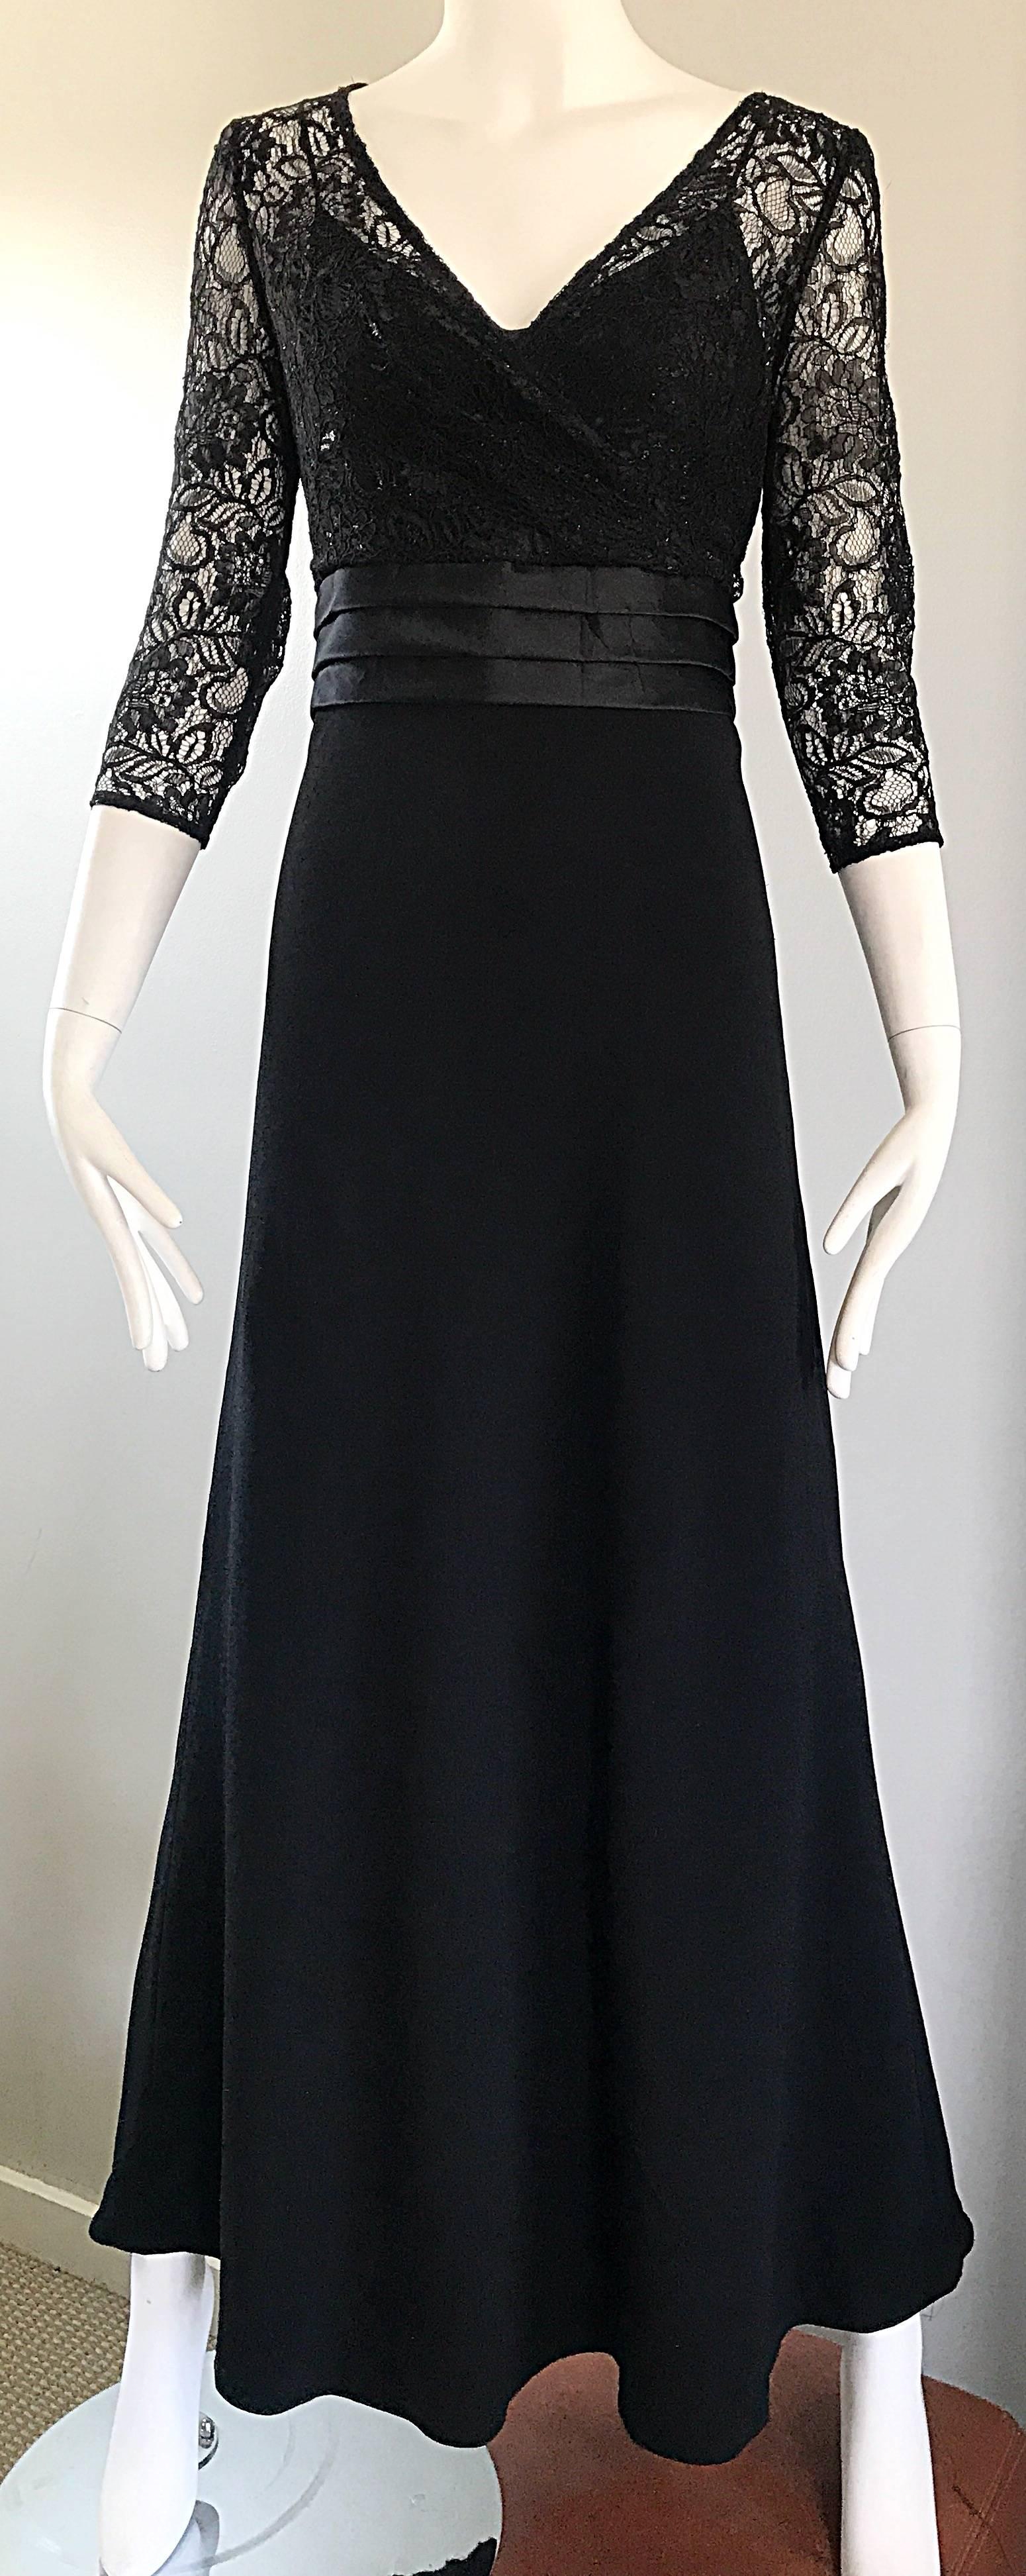 Badgley Mischka Beautiful Black Lace 3/4 Sleeves Size 8 Vintage Gown, 1990s   In Excellent Condition For Sale In San Diego, CA